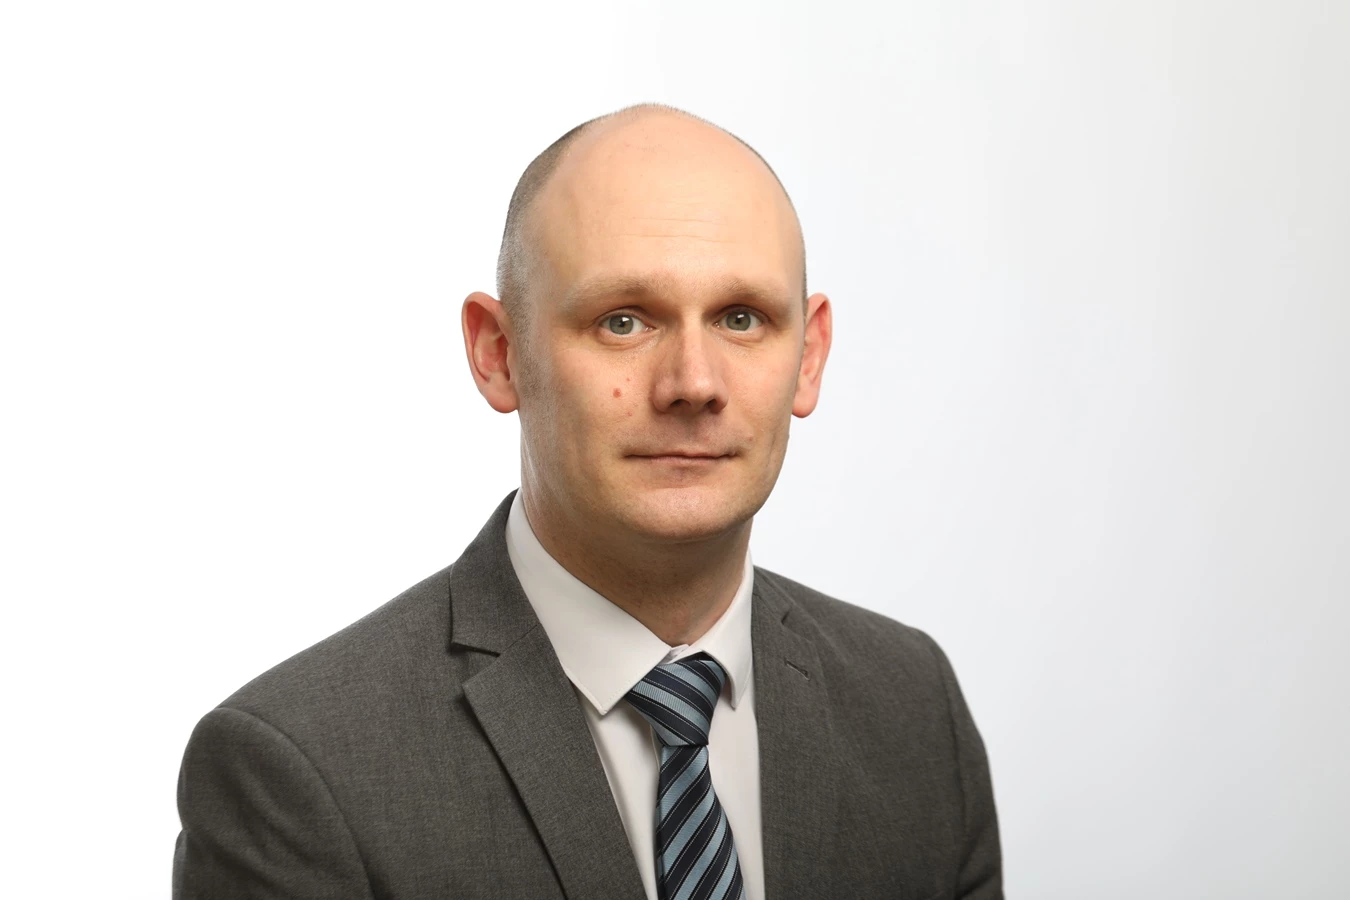 Chris Ferguson, North East deputy chair of insolvency and restructuring trade body R3